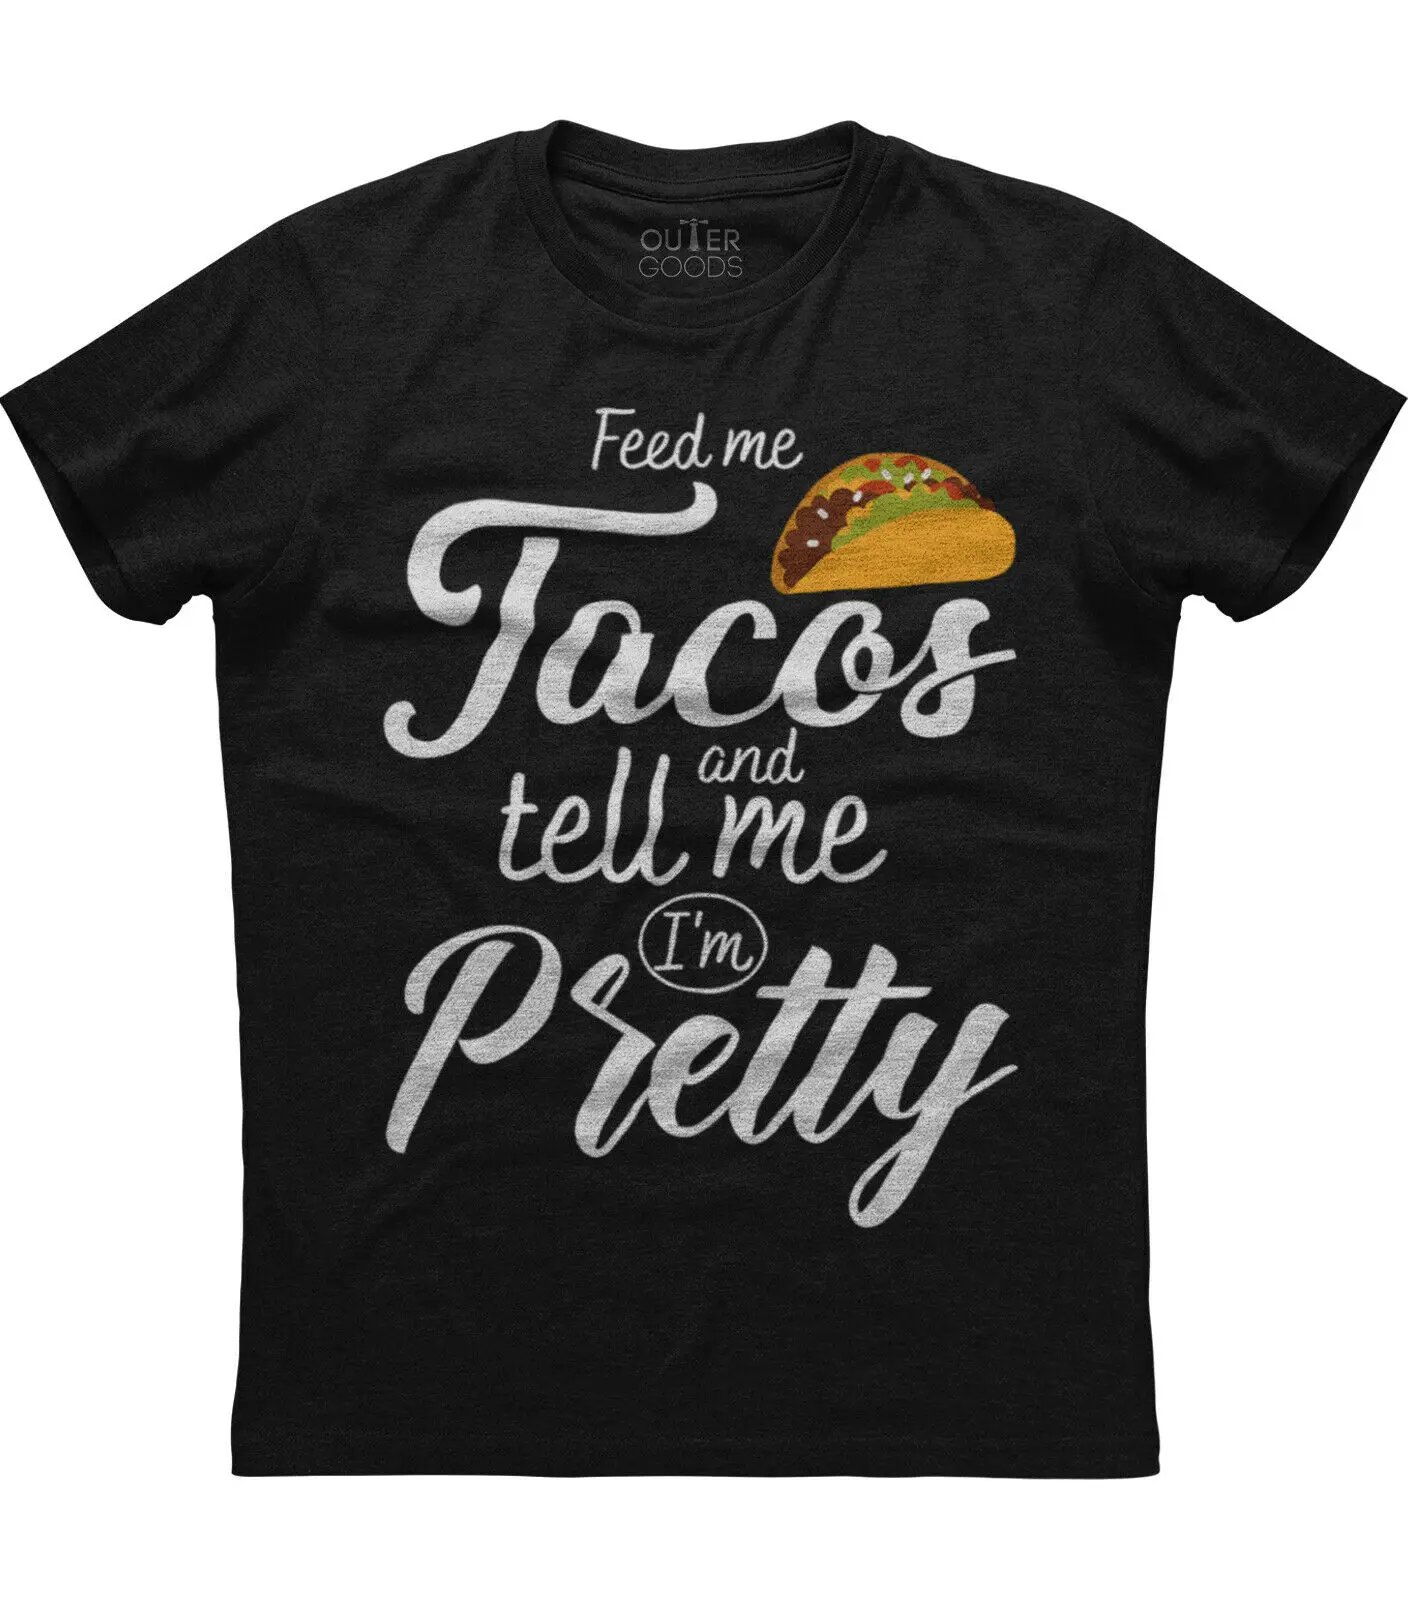 

Feed Me Tacos & Tell Me I'm Pretty. Funny Graphic Phrase T-Shirt. Summer Cotton O-Neck Short Sleeve Mens T Shirt New S-3XL